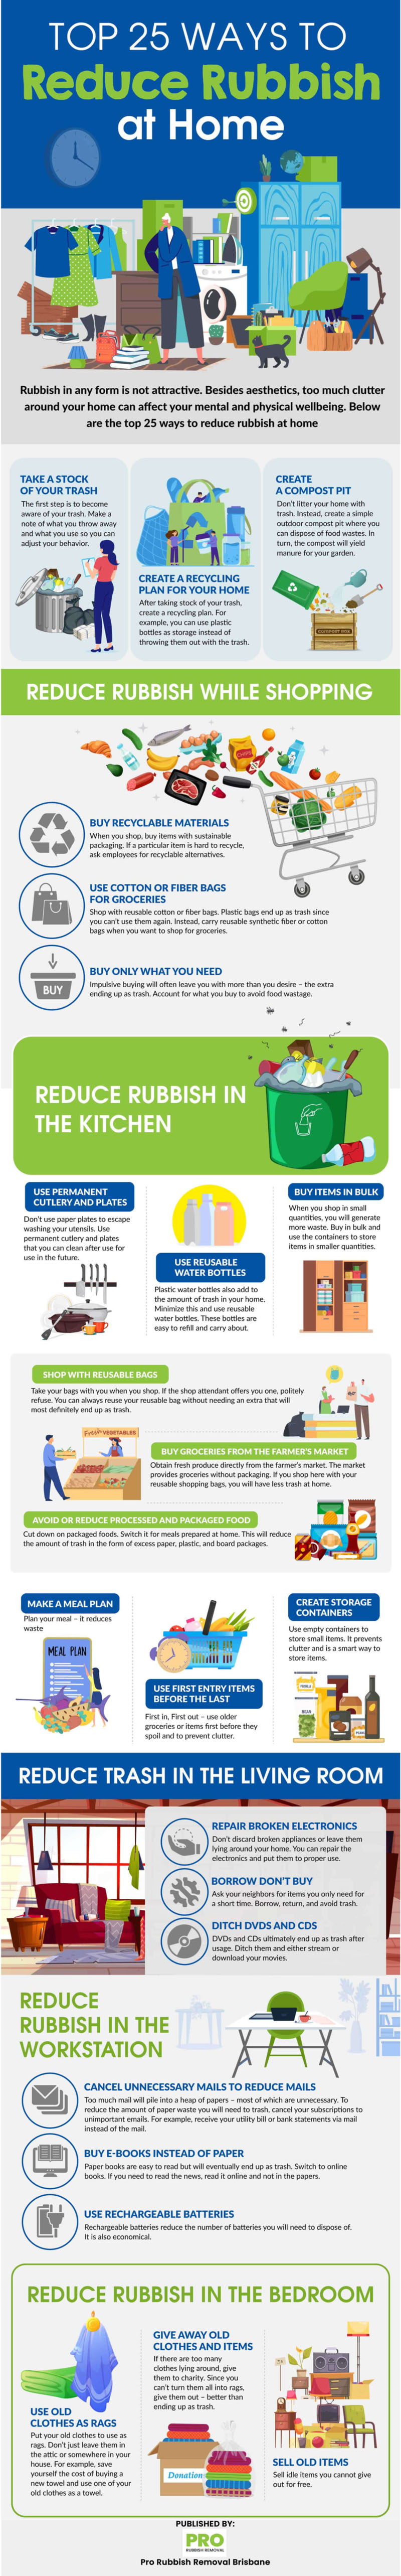 Top 25 Ways to Reduce Rubbish at Home